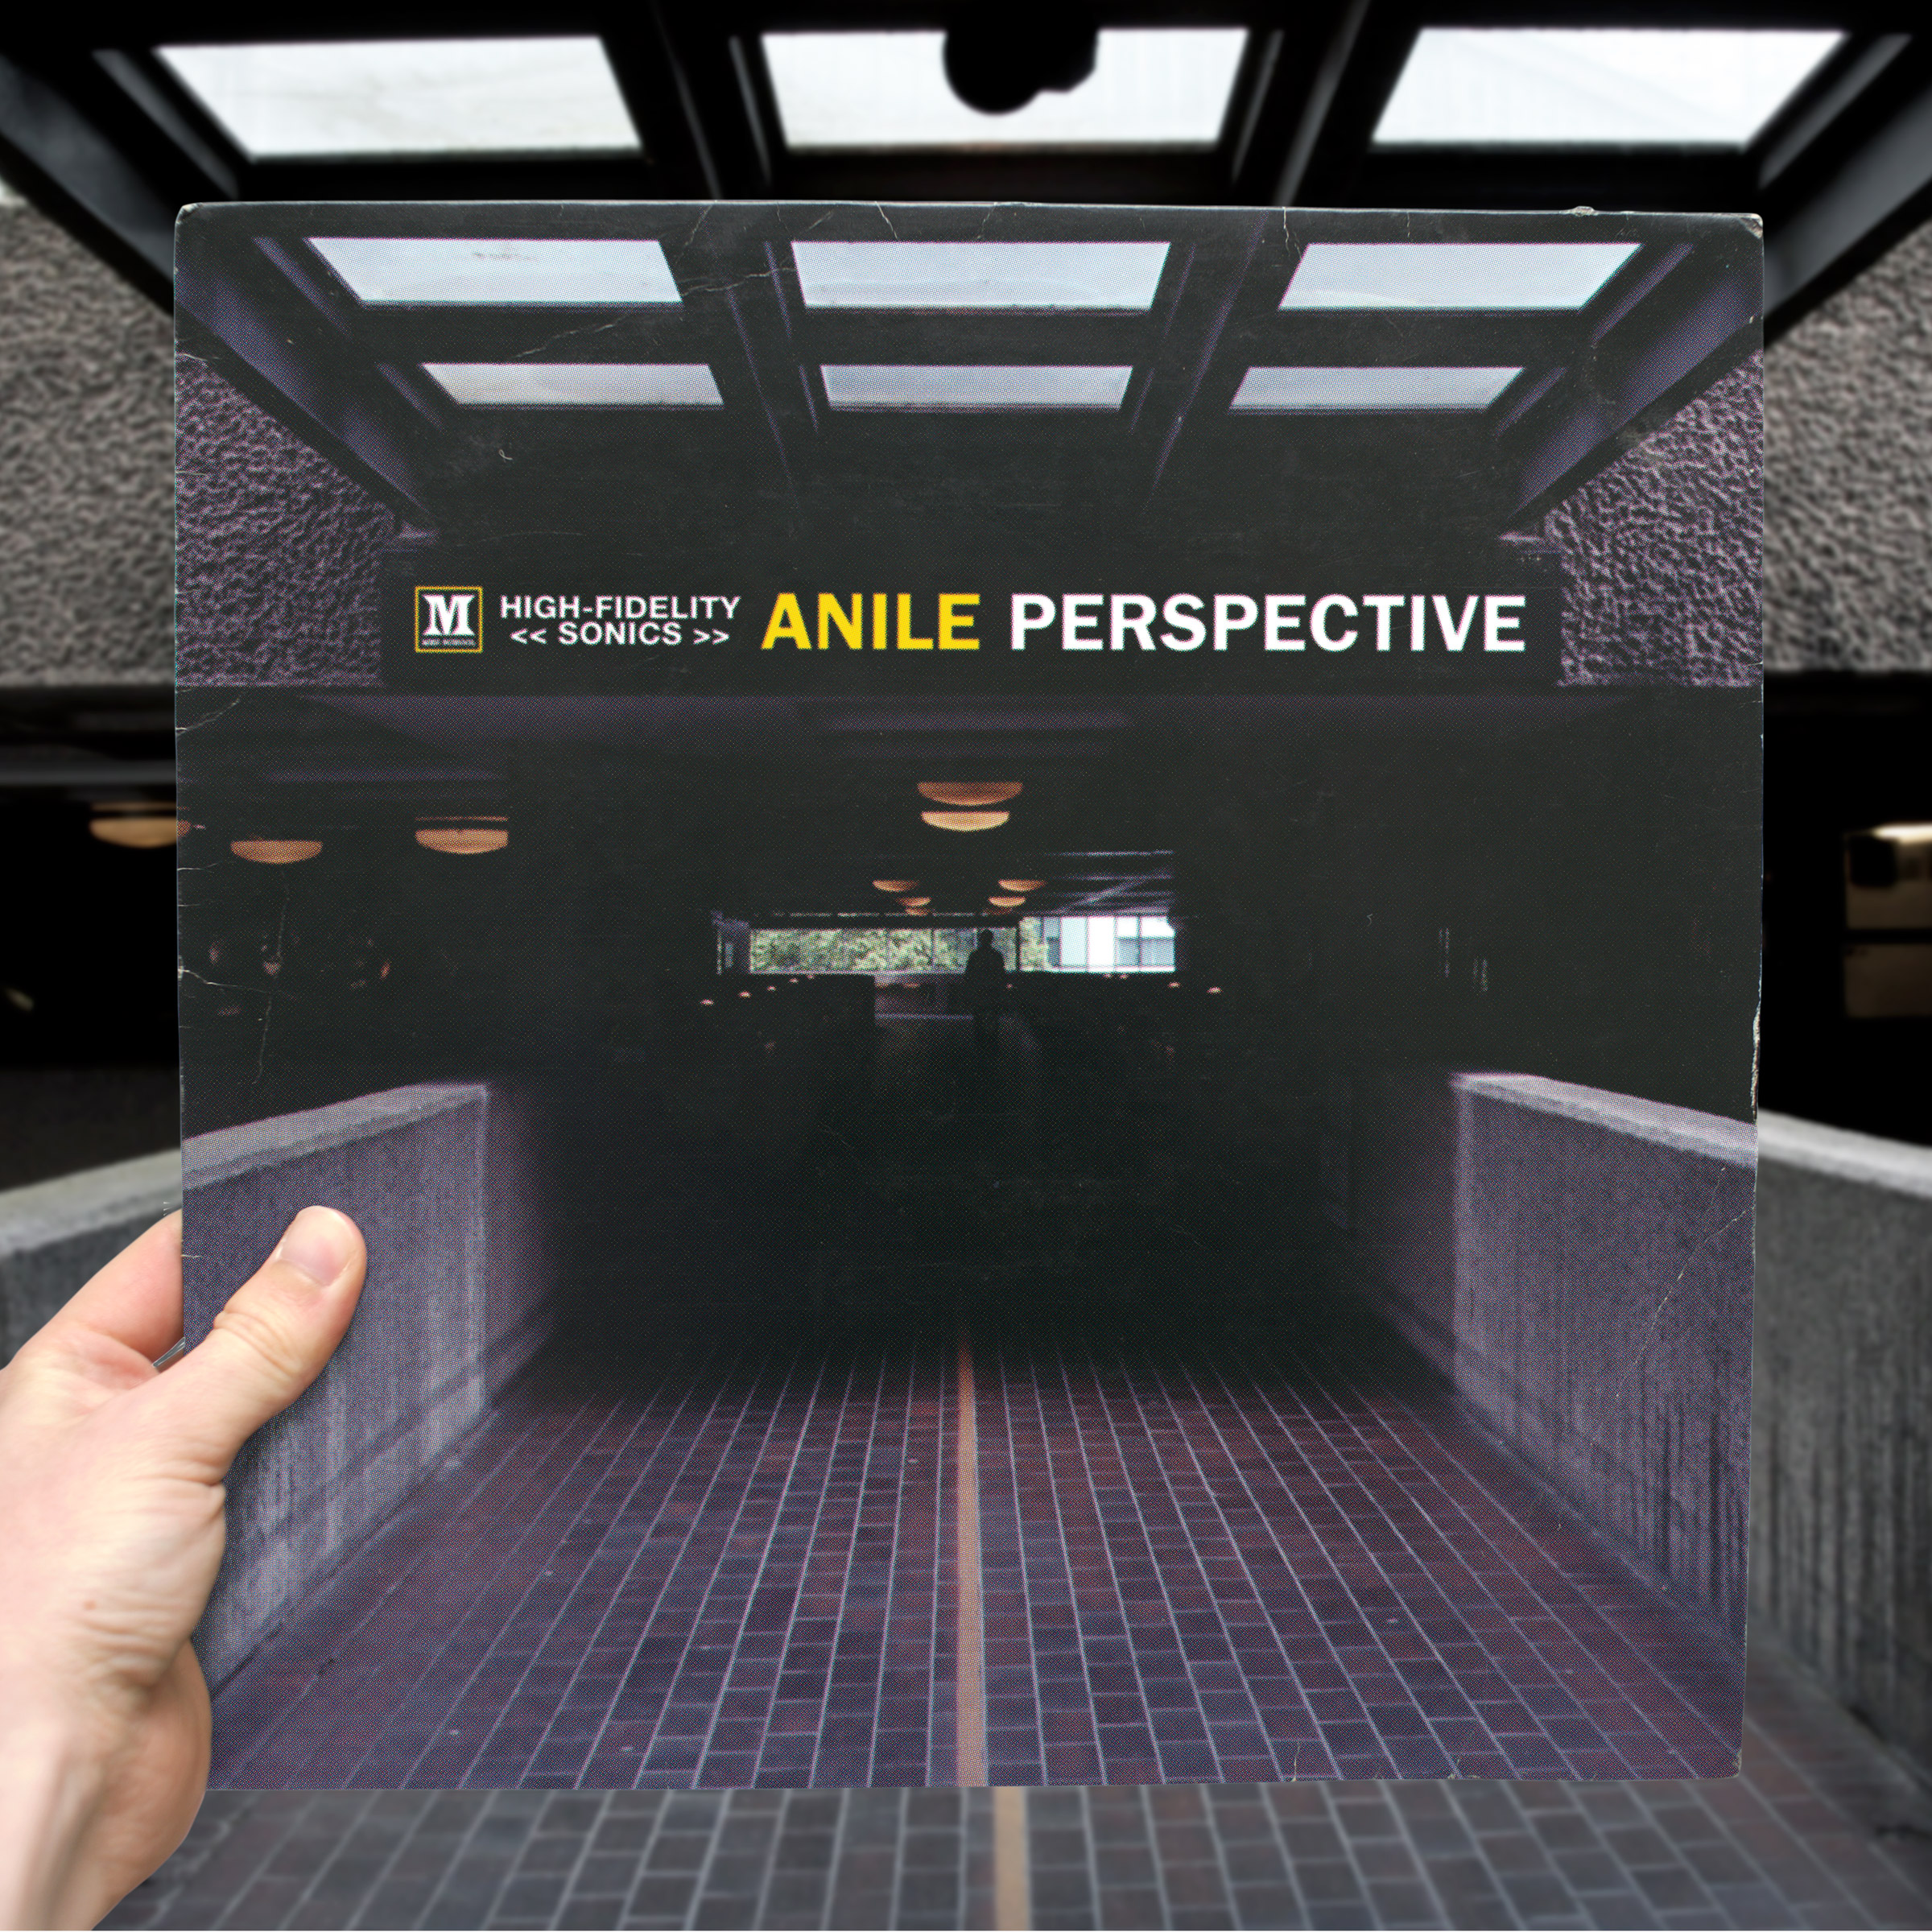 Anile/PERSPECTIVE CD